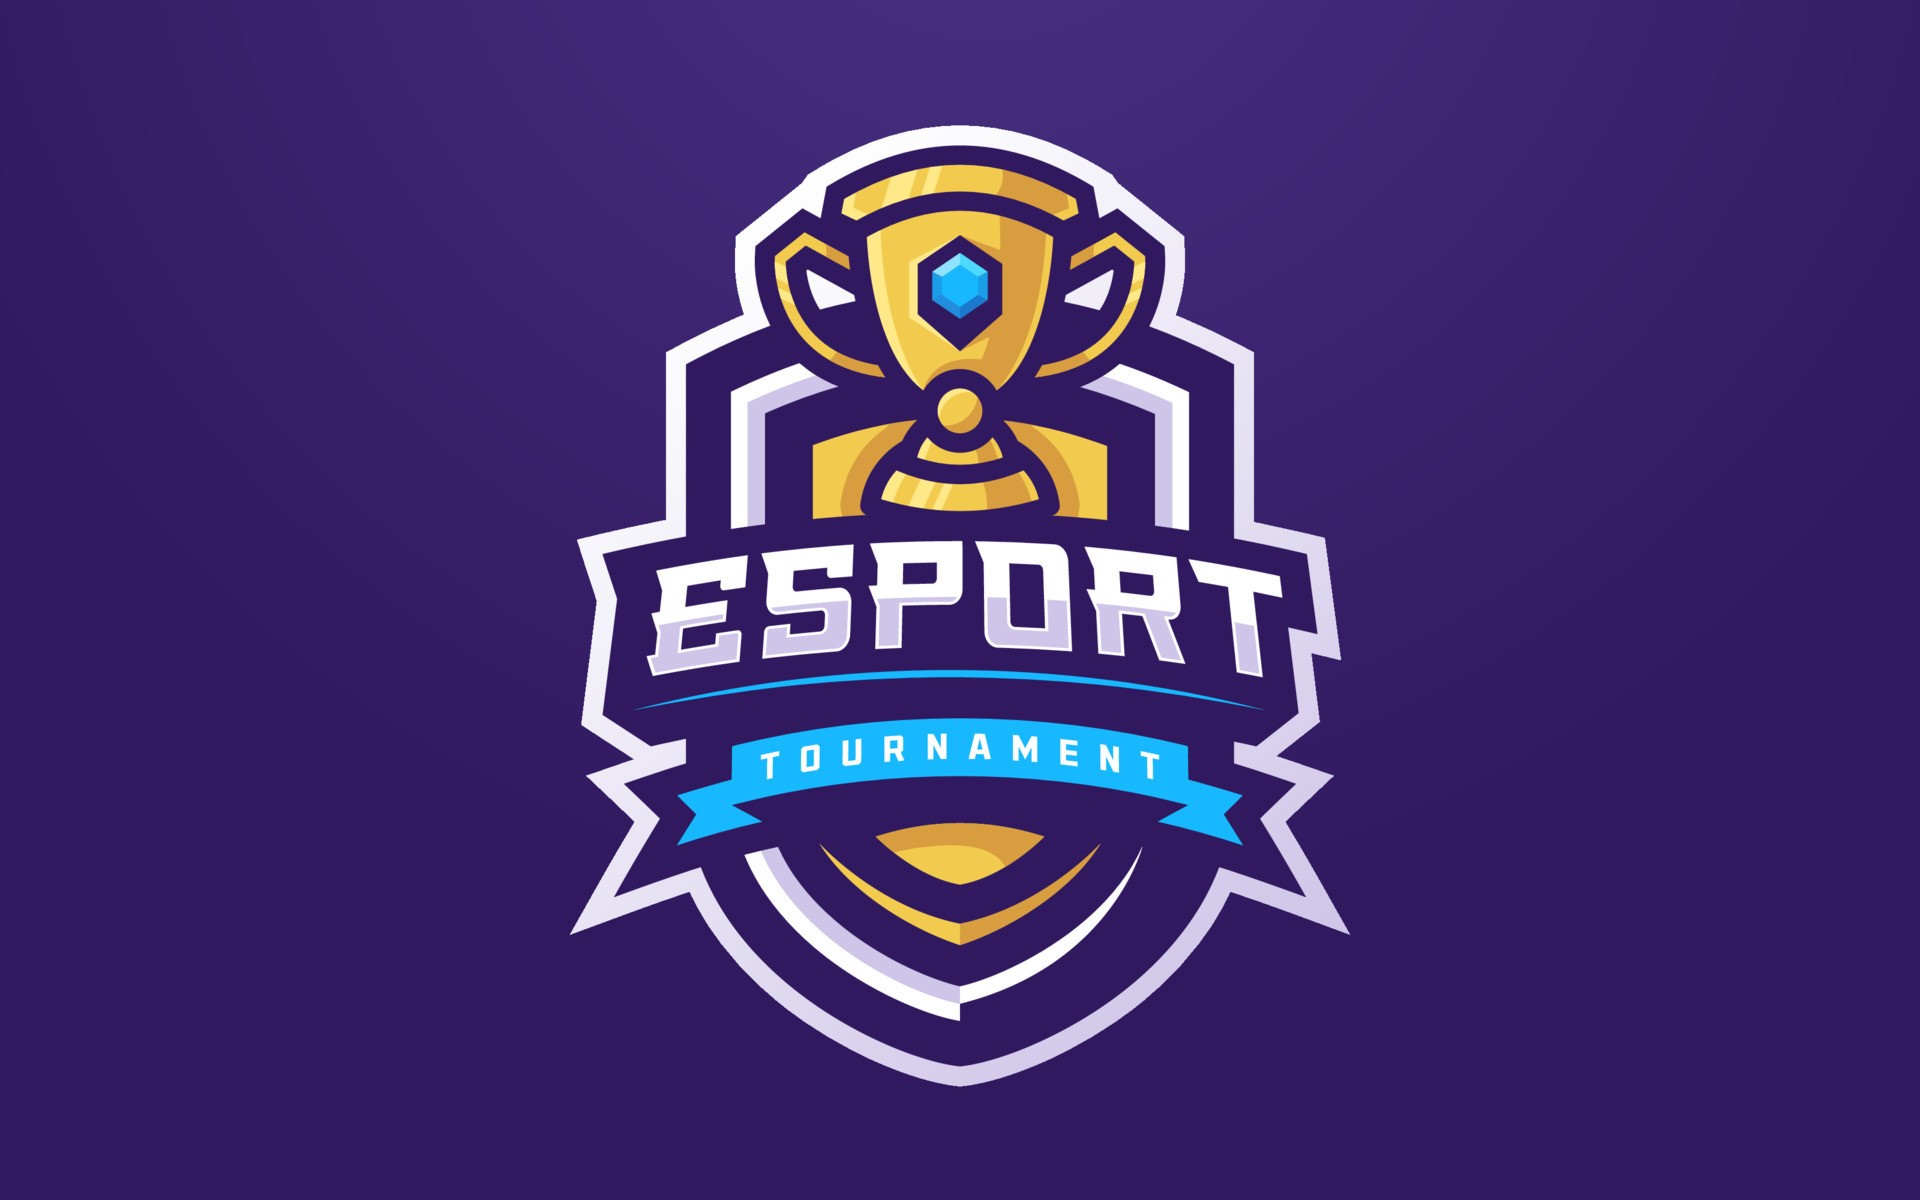 Esports Competitions